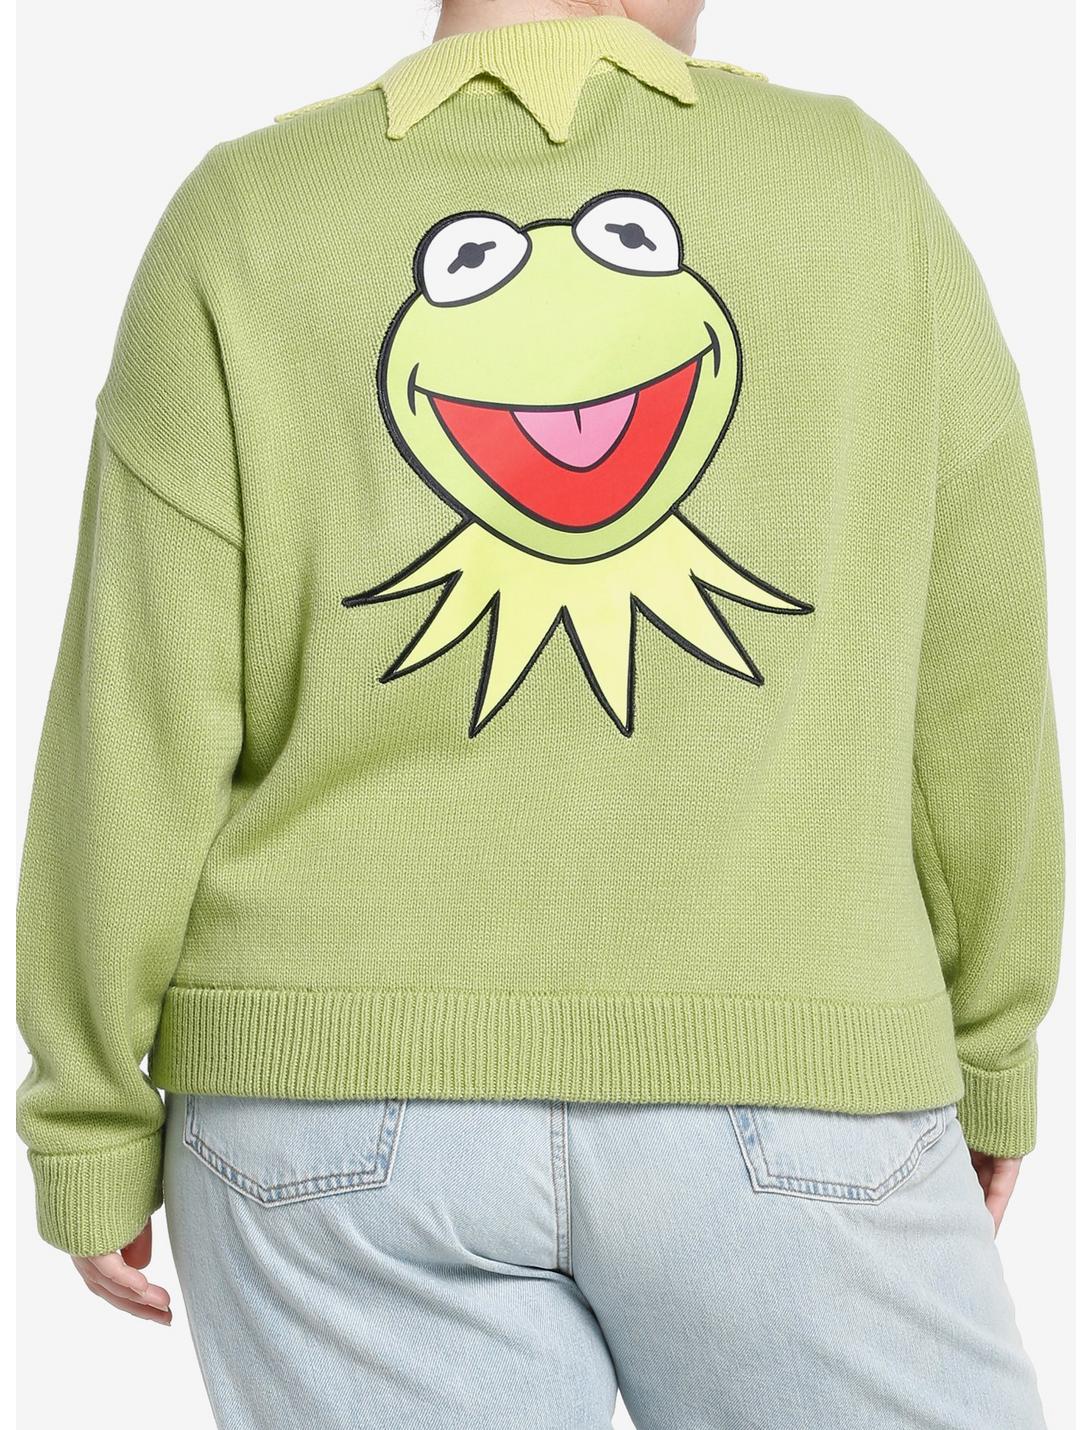 Disney The Muppets Kermit The Frog Girls Cardigan Plus Size, GREEN, hi-res